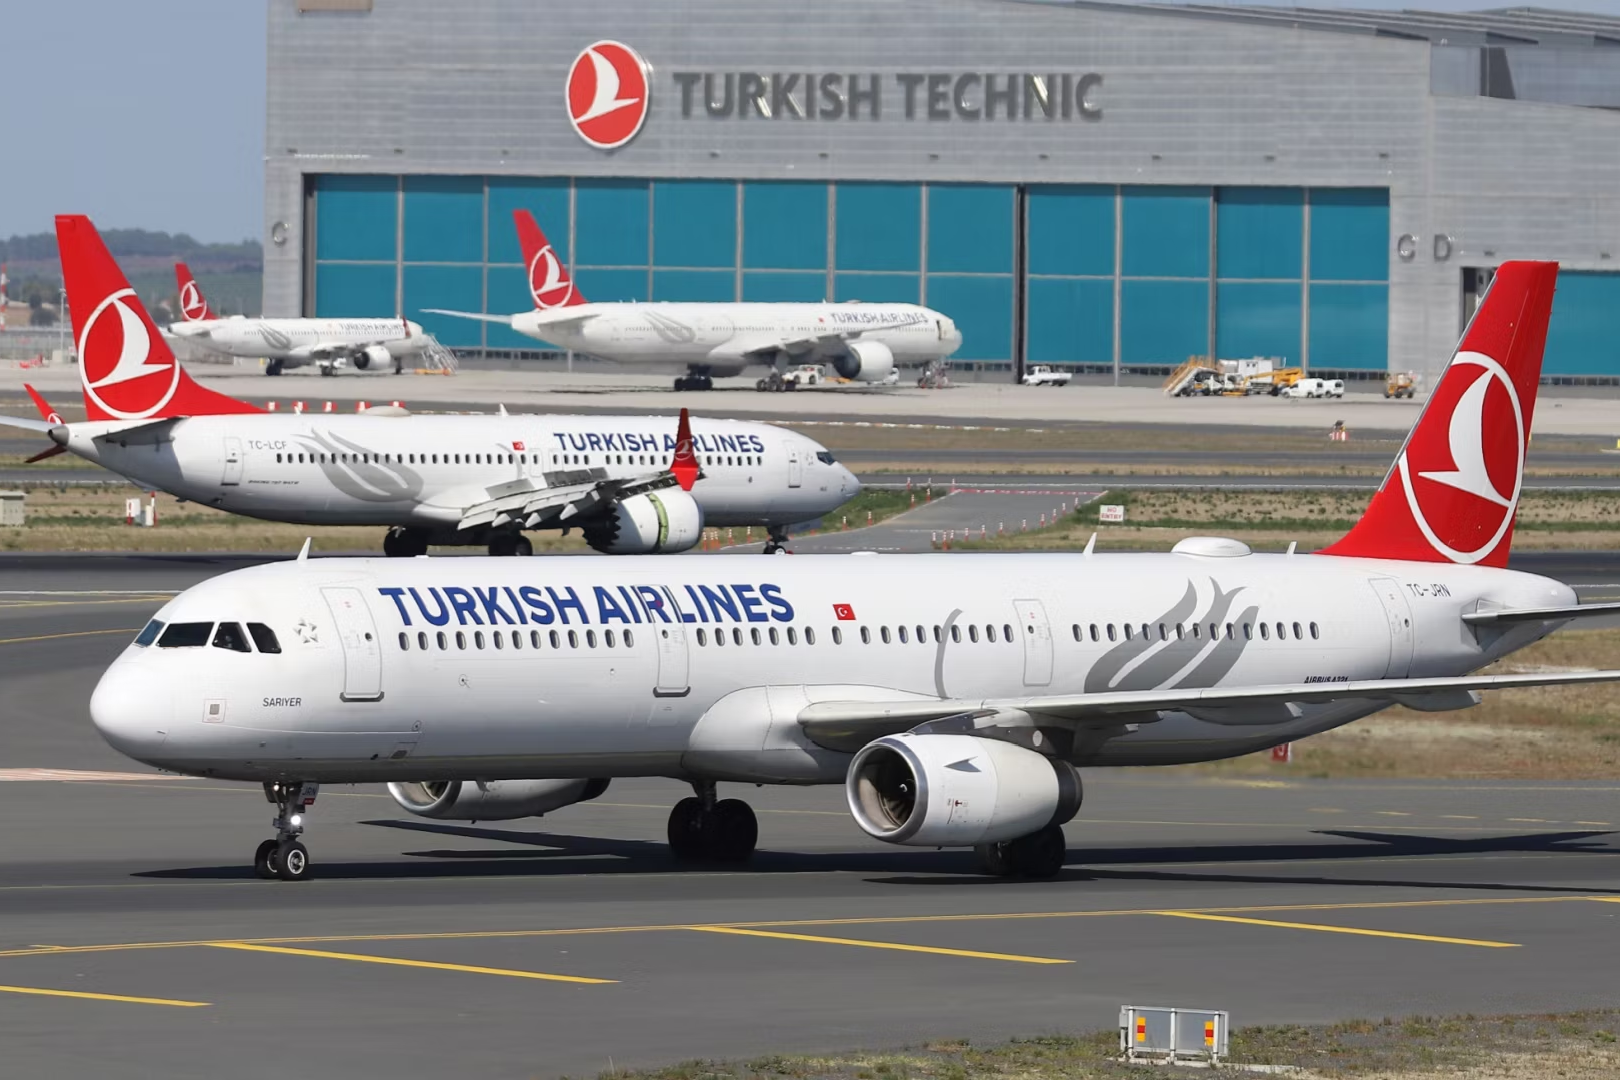 Four Turkish Airlines Aircraft taxiing or parked at an airport, with a Turkish Technic hangar in the background.